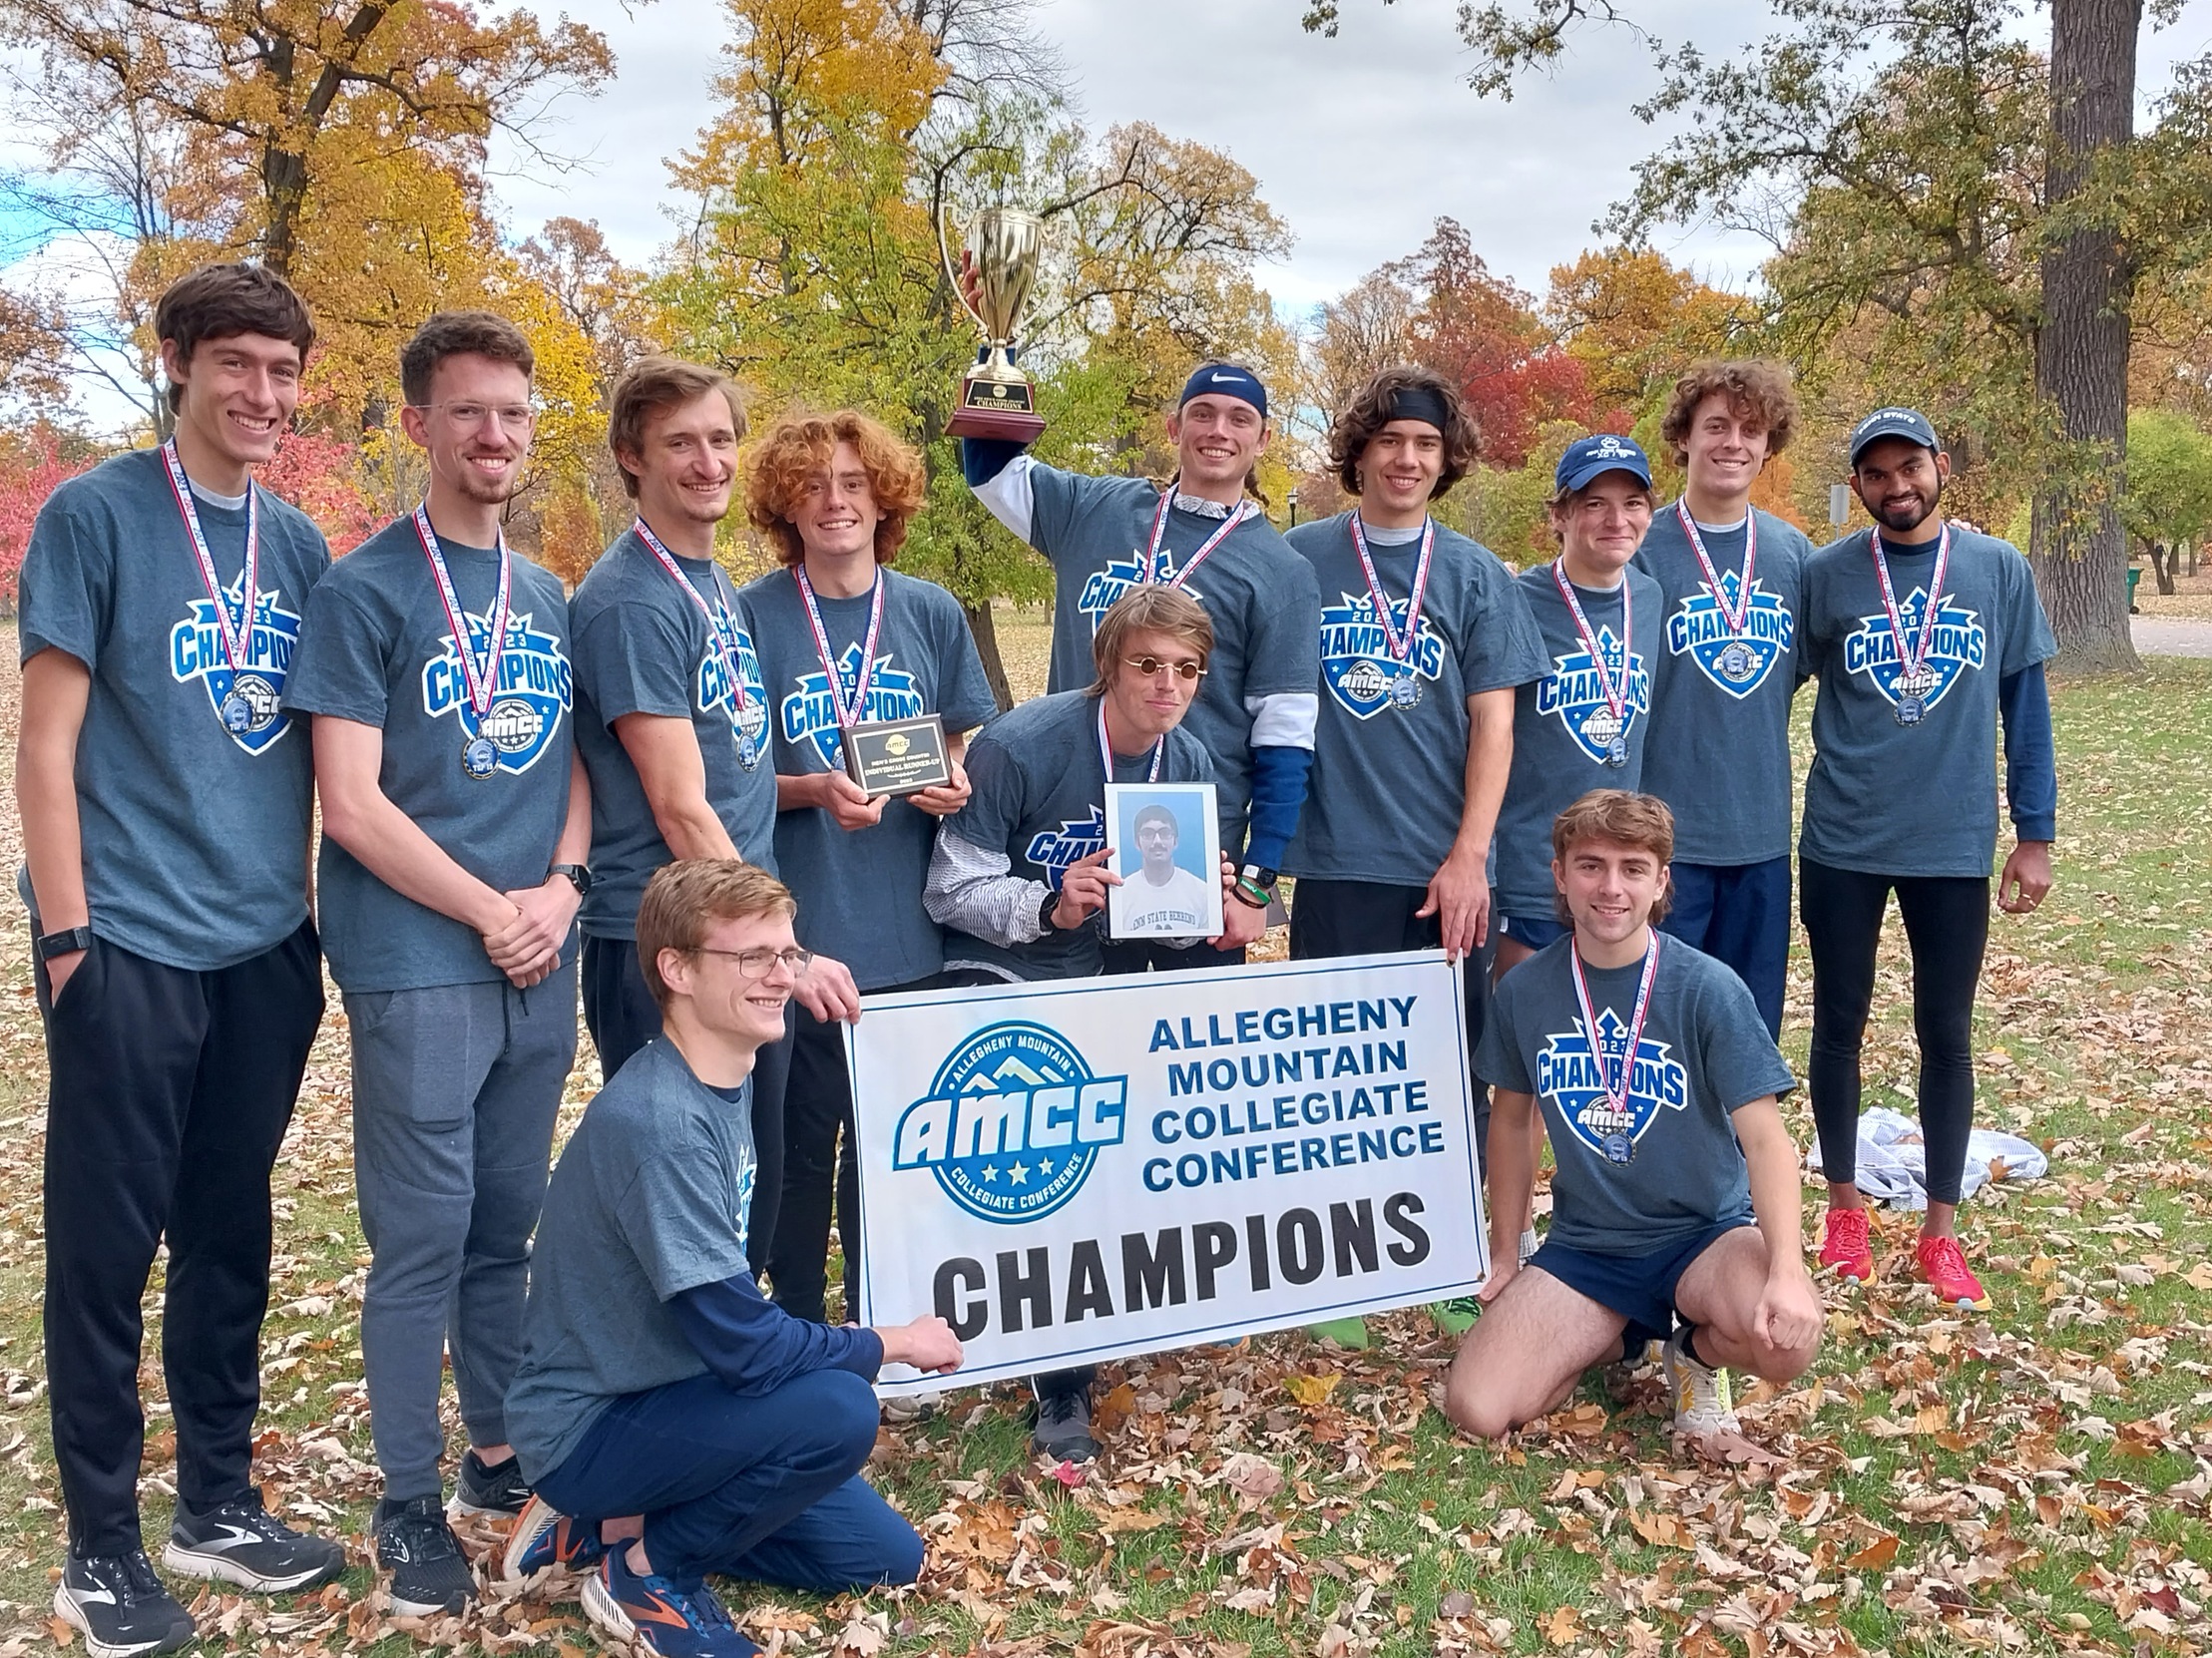 Men’s Cross Country Wins Fourth Consecutive AMCC Championship